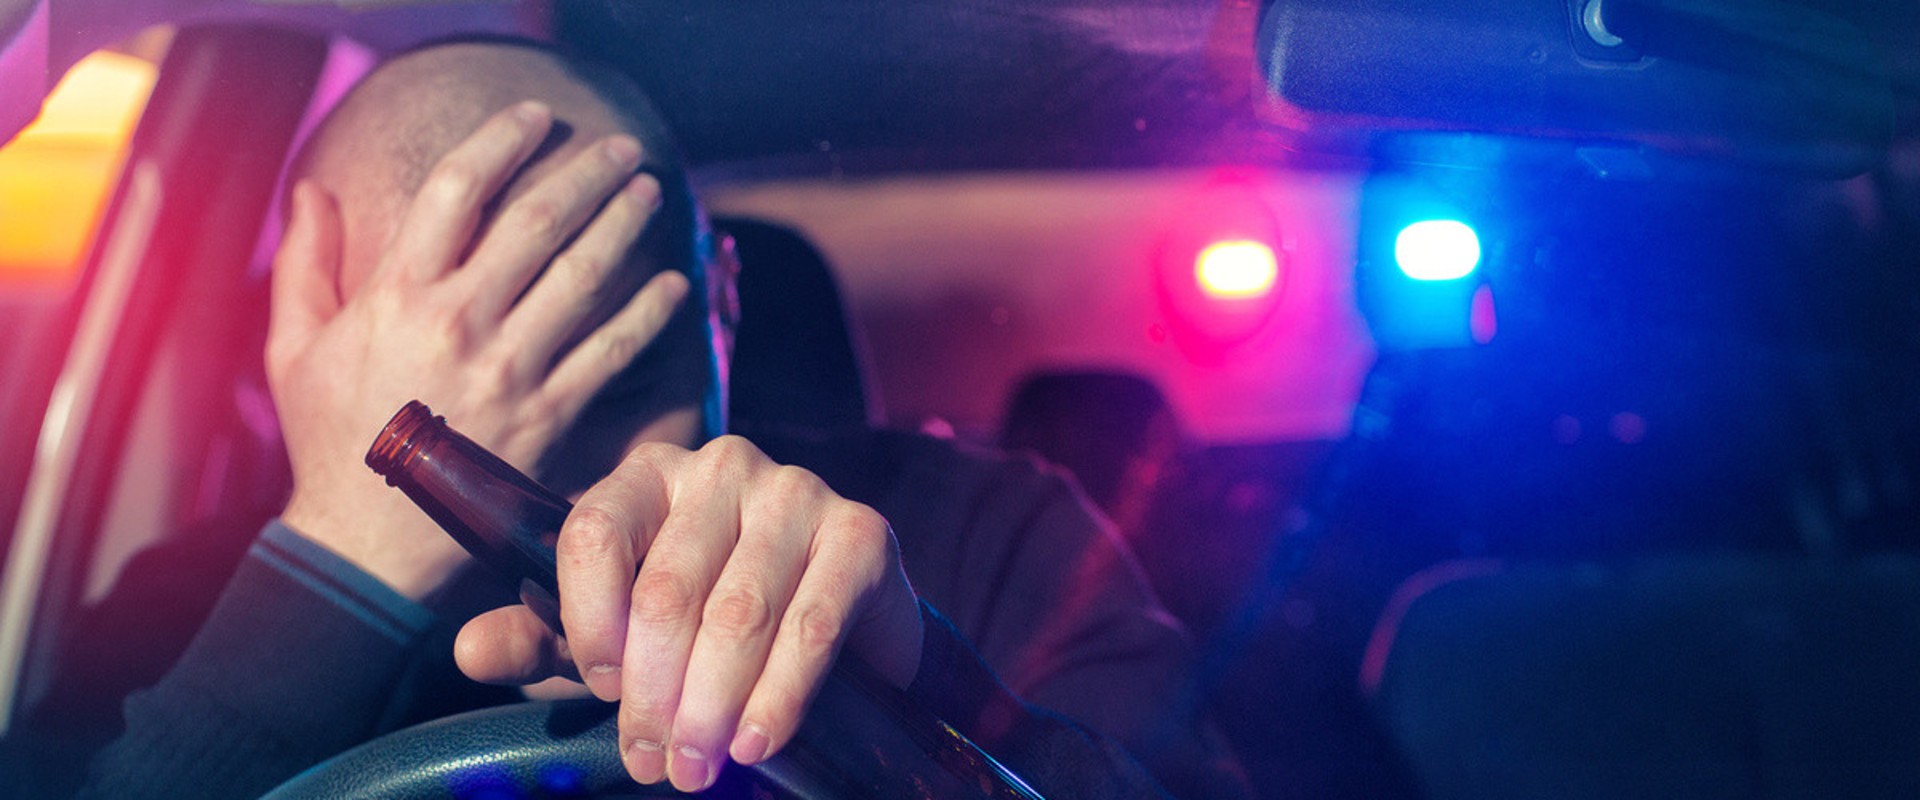 Why is drunk driving a big problem?